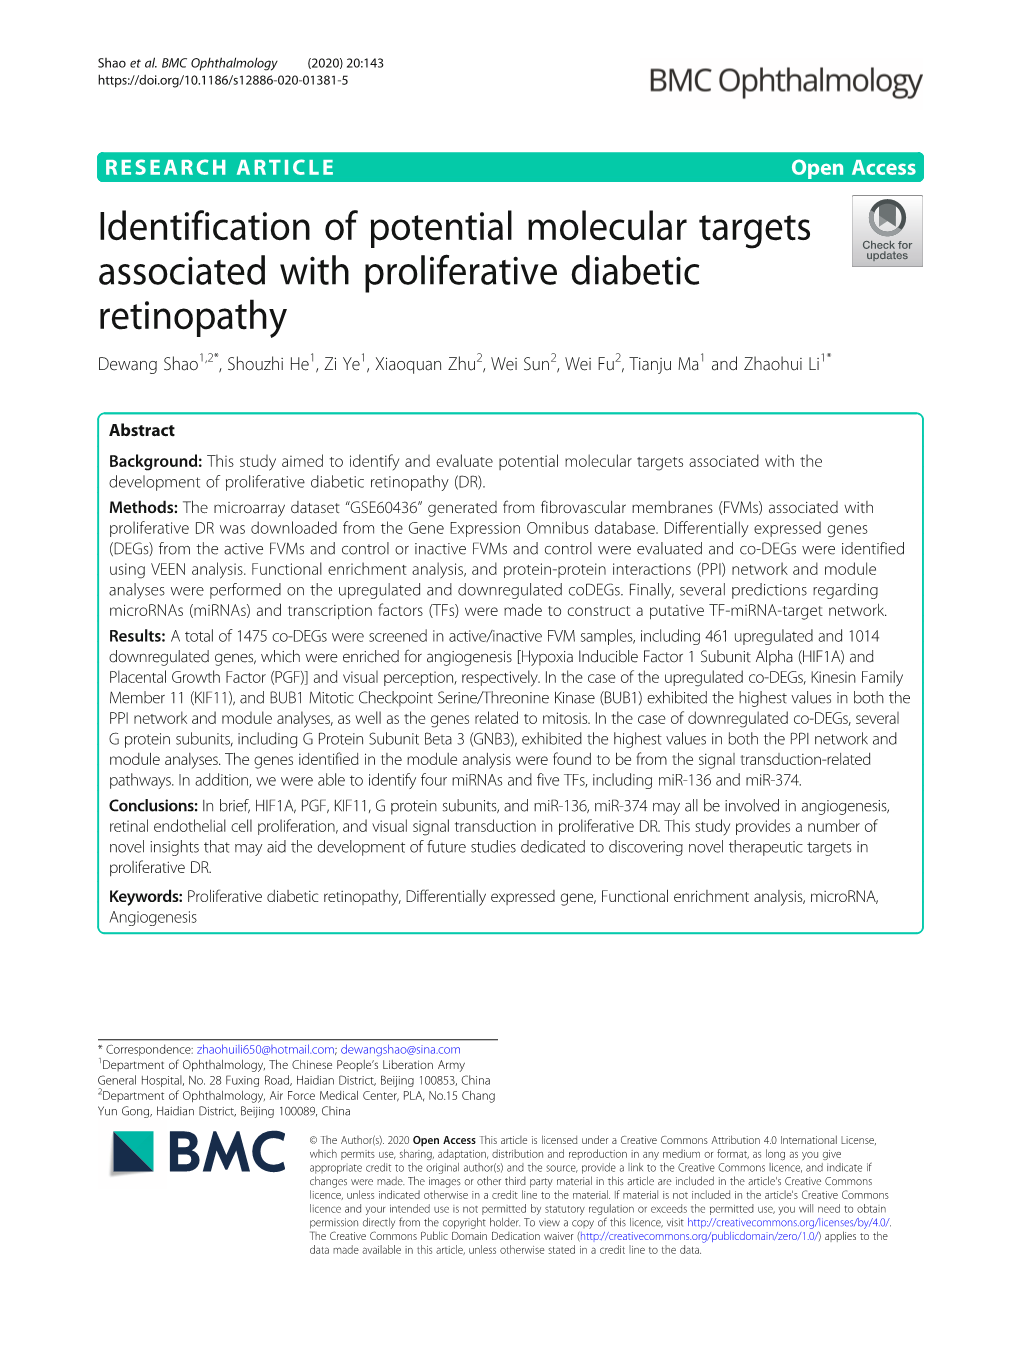 Identification of Potential Molecular Targets Associated with Proliferative